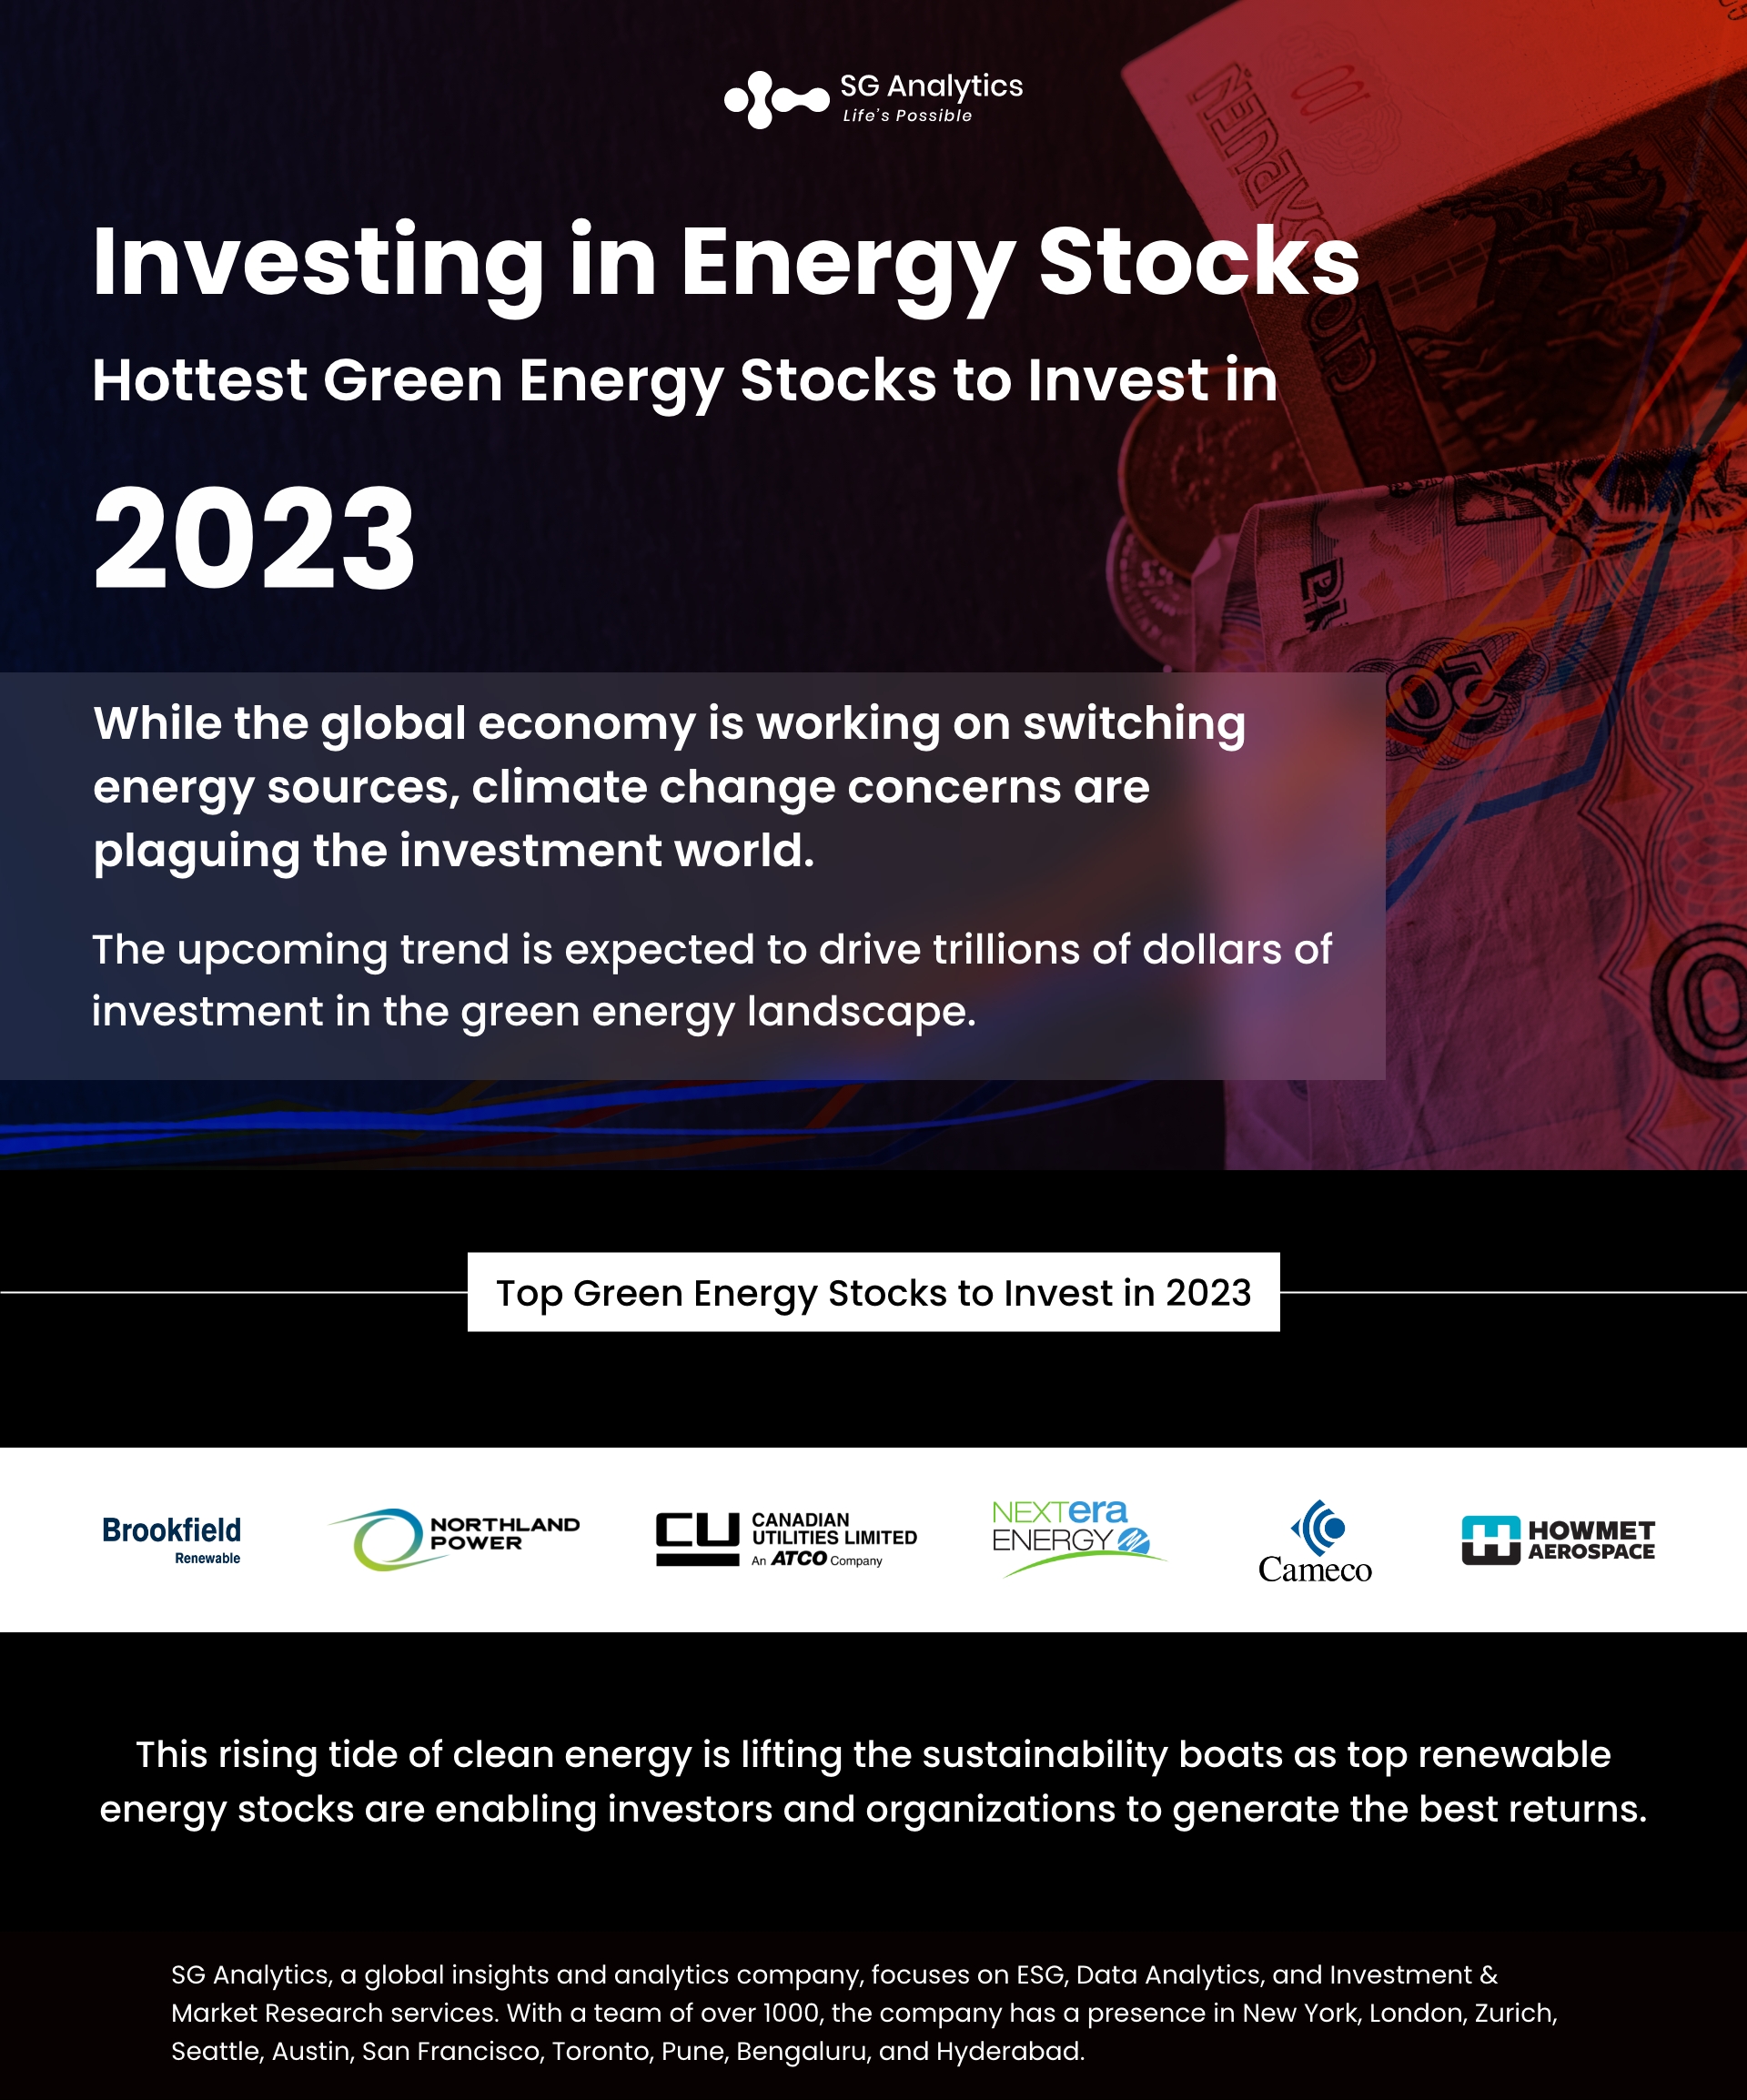 Hottest Green Energy Stocks to Invest in 2023